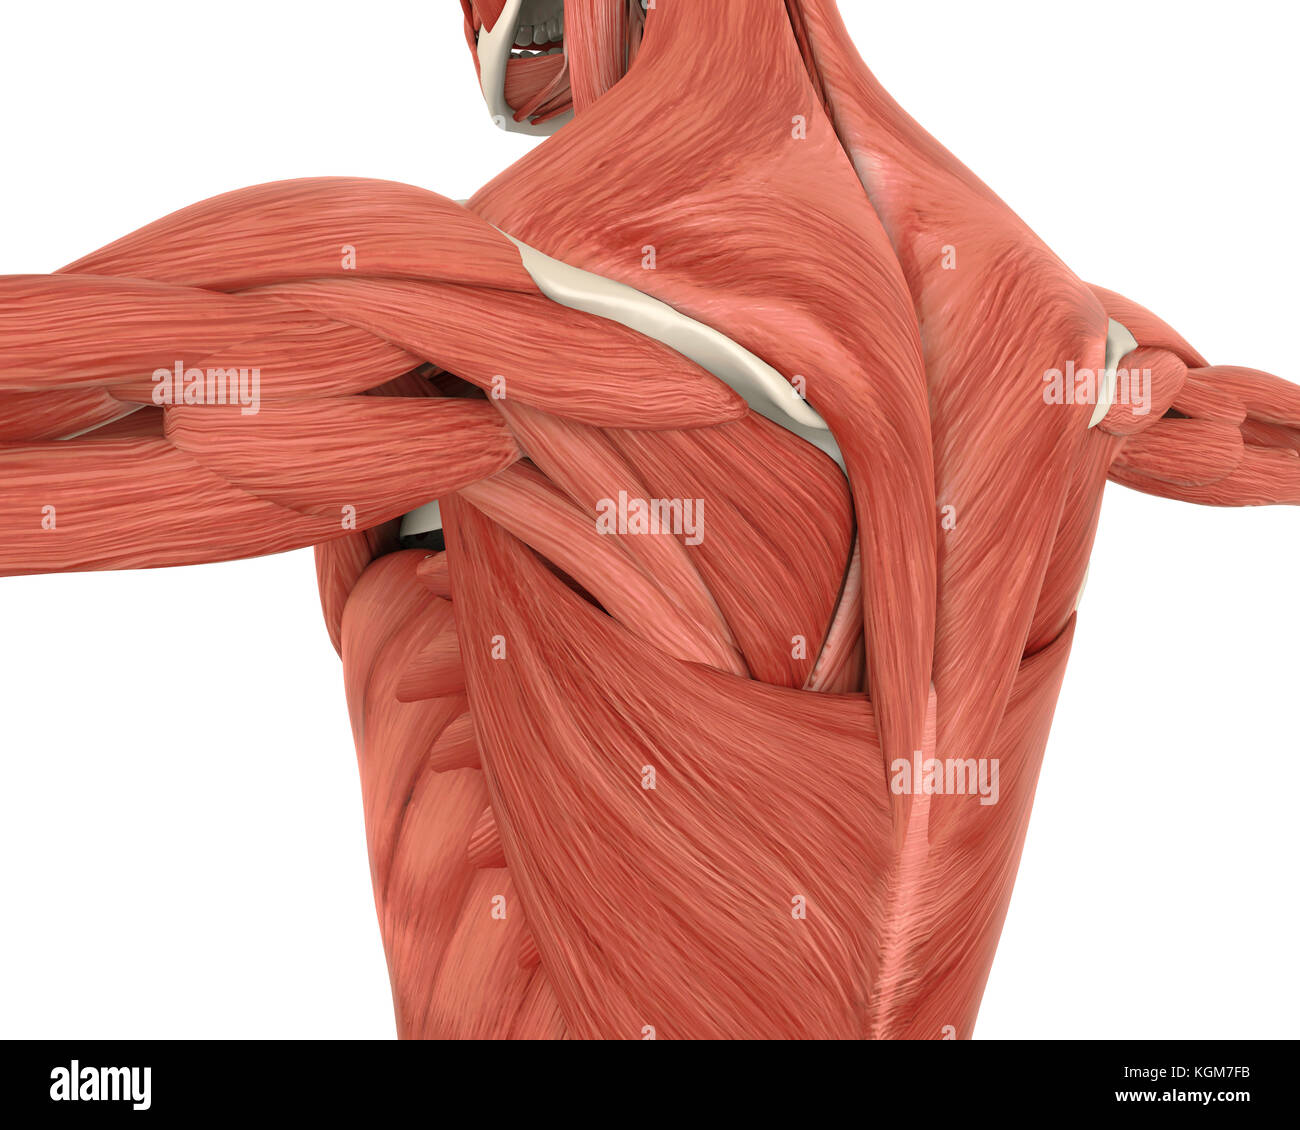 Muscles of the Back Anatomy Stock Photo